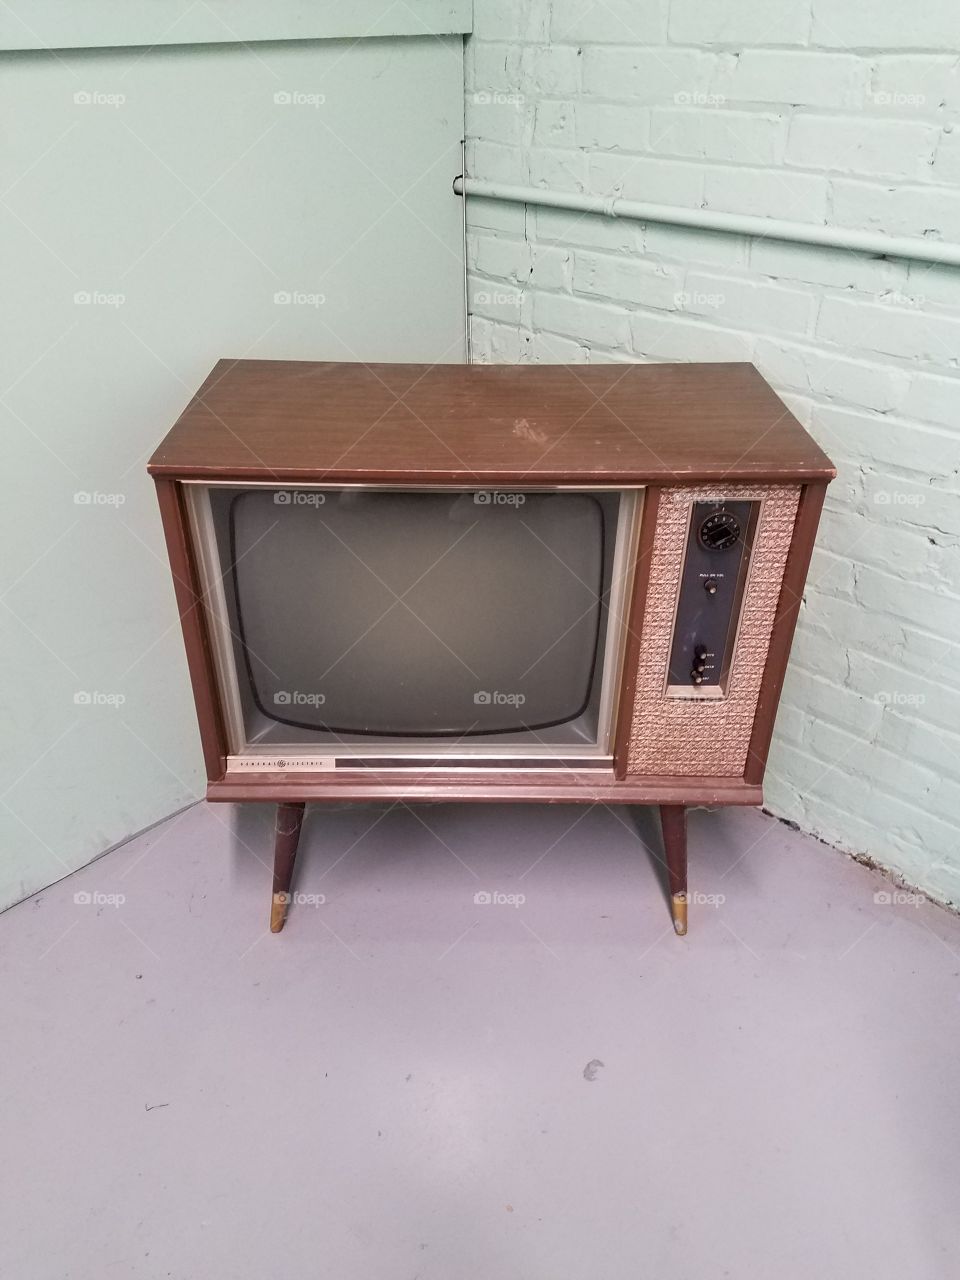 Old telly